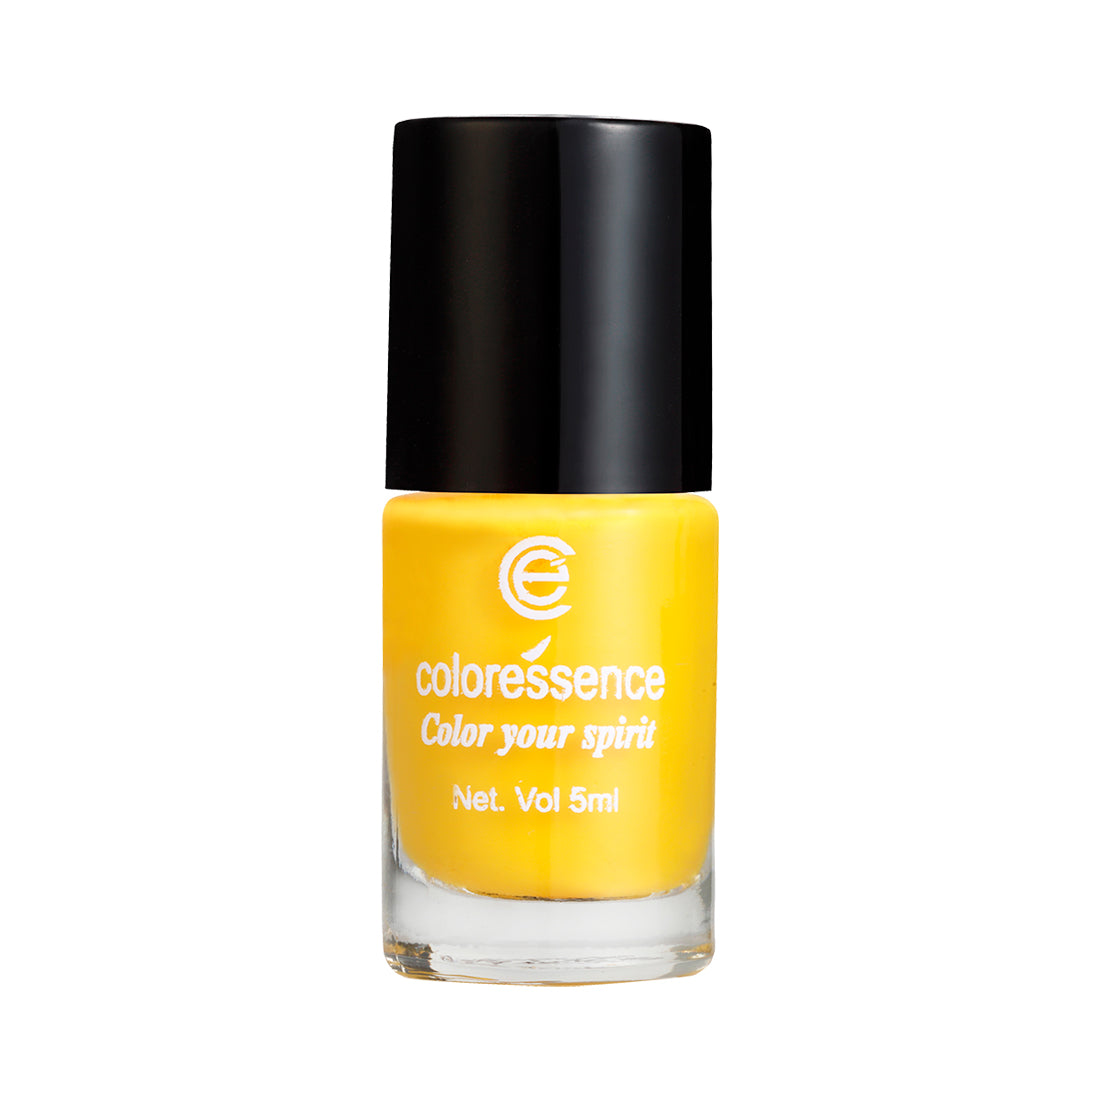 Coloressence Regular Nail Paint (Seven Seas) Price - Buy Online at Best  Price in India